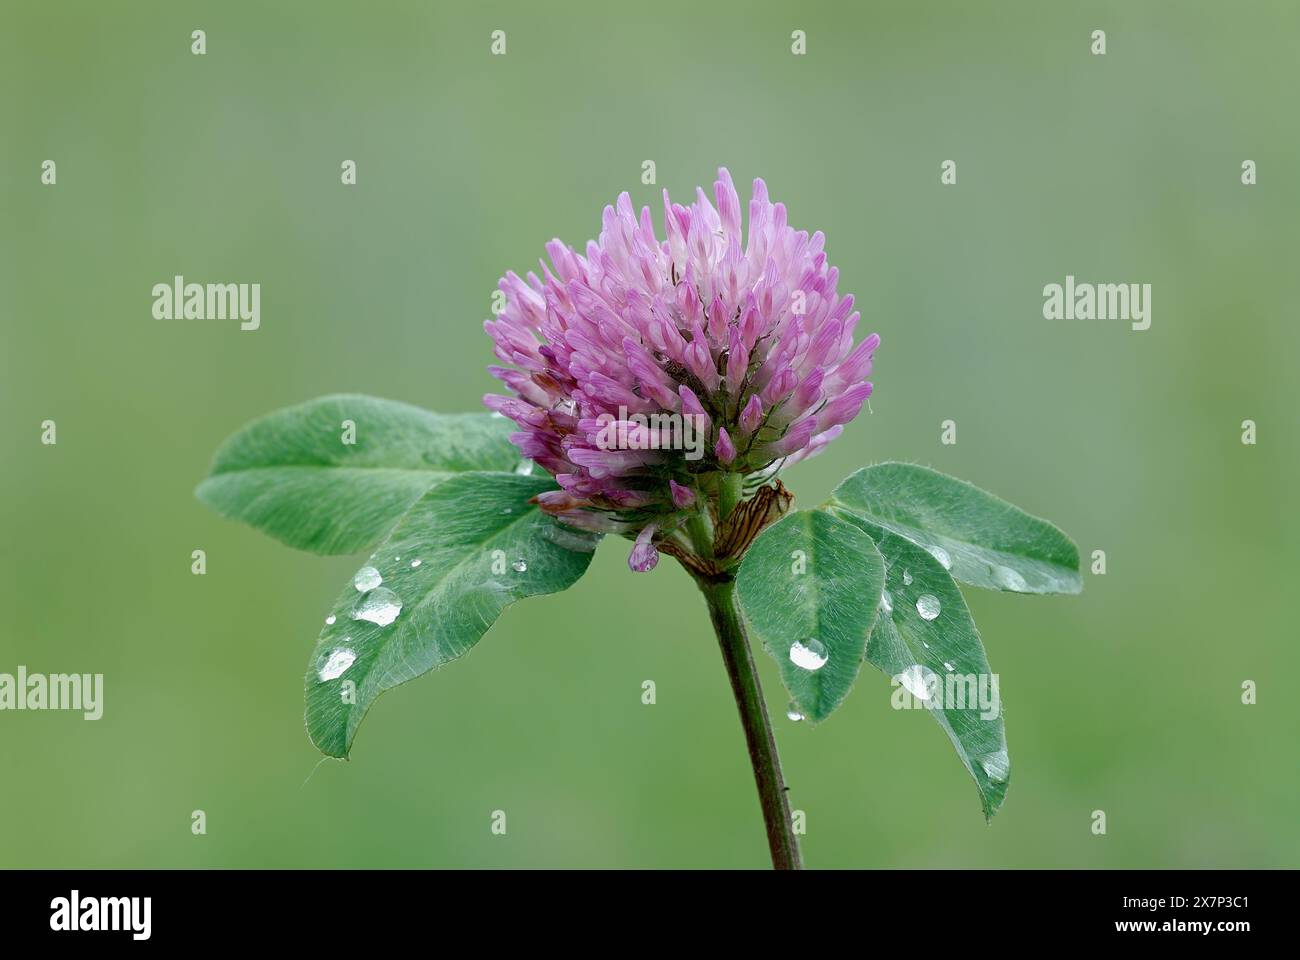 Clover flower, Trifolium pratense after rain, close up. With water drops on the leaves. Isolated on natural green background. Trencin, Slovakia Stock Photo